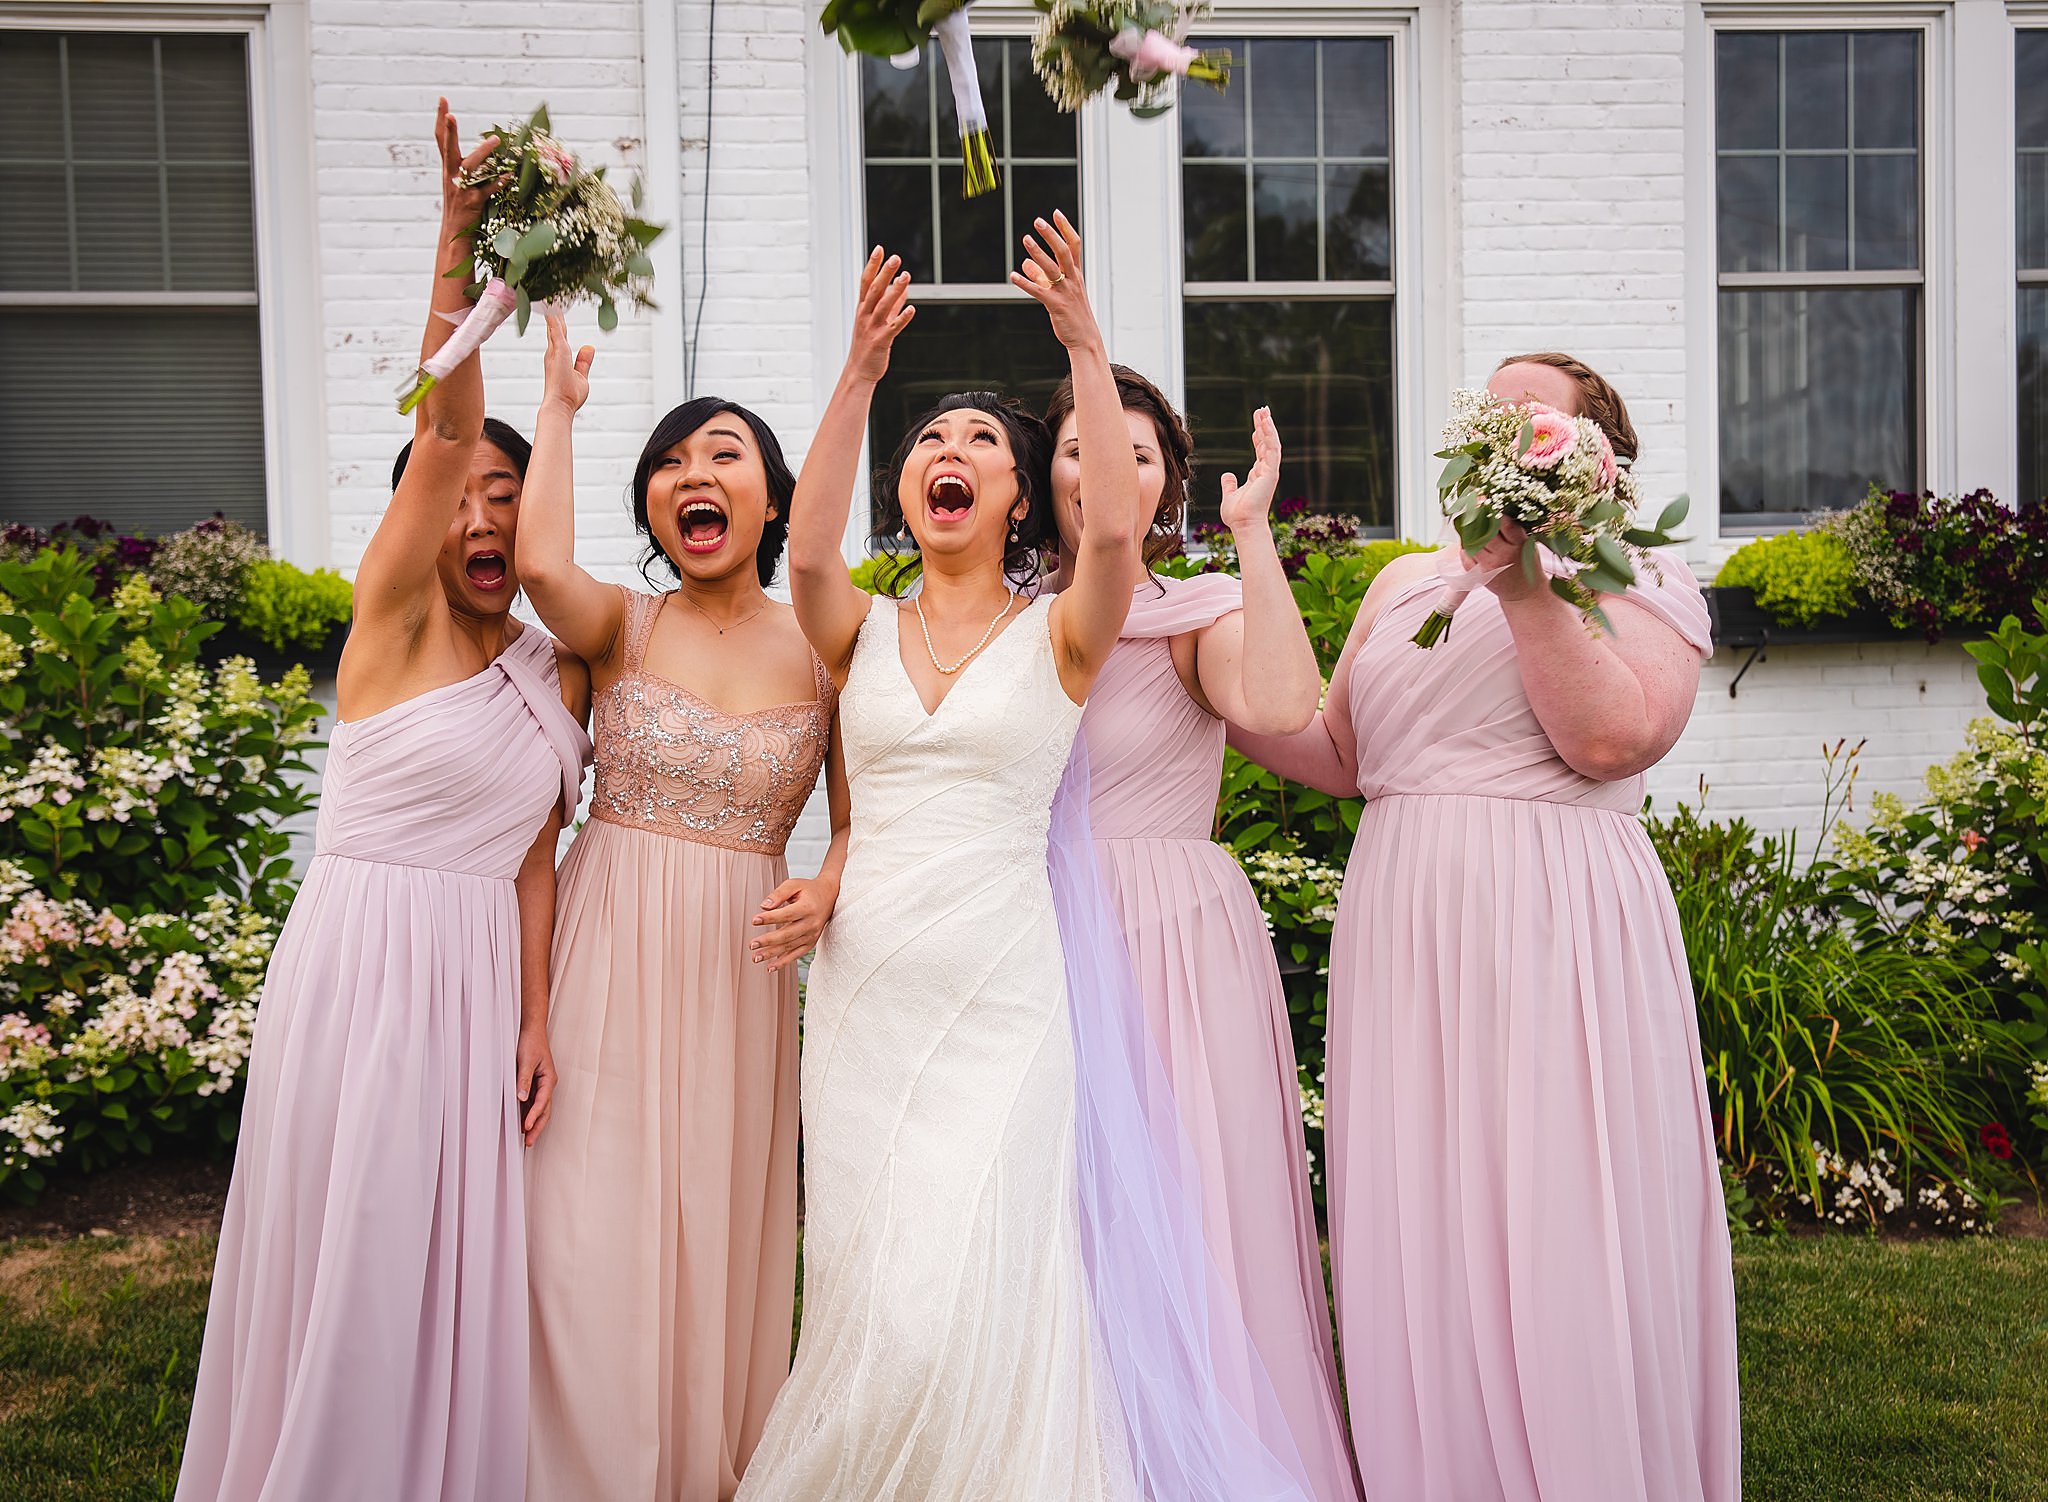 bride and bridesmaids tossing bouquets in air